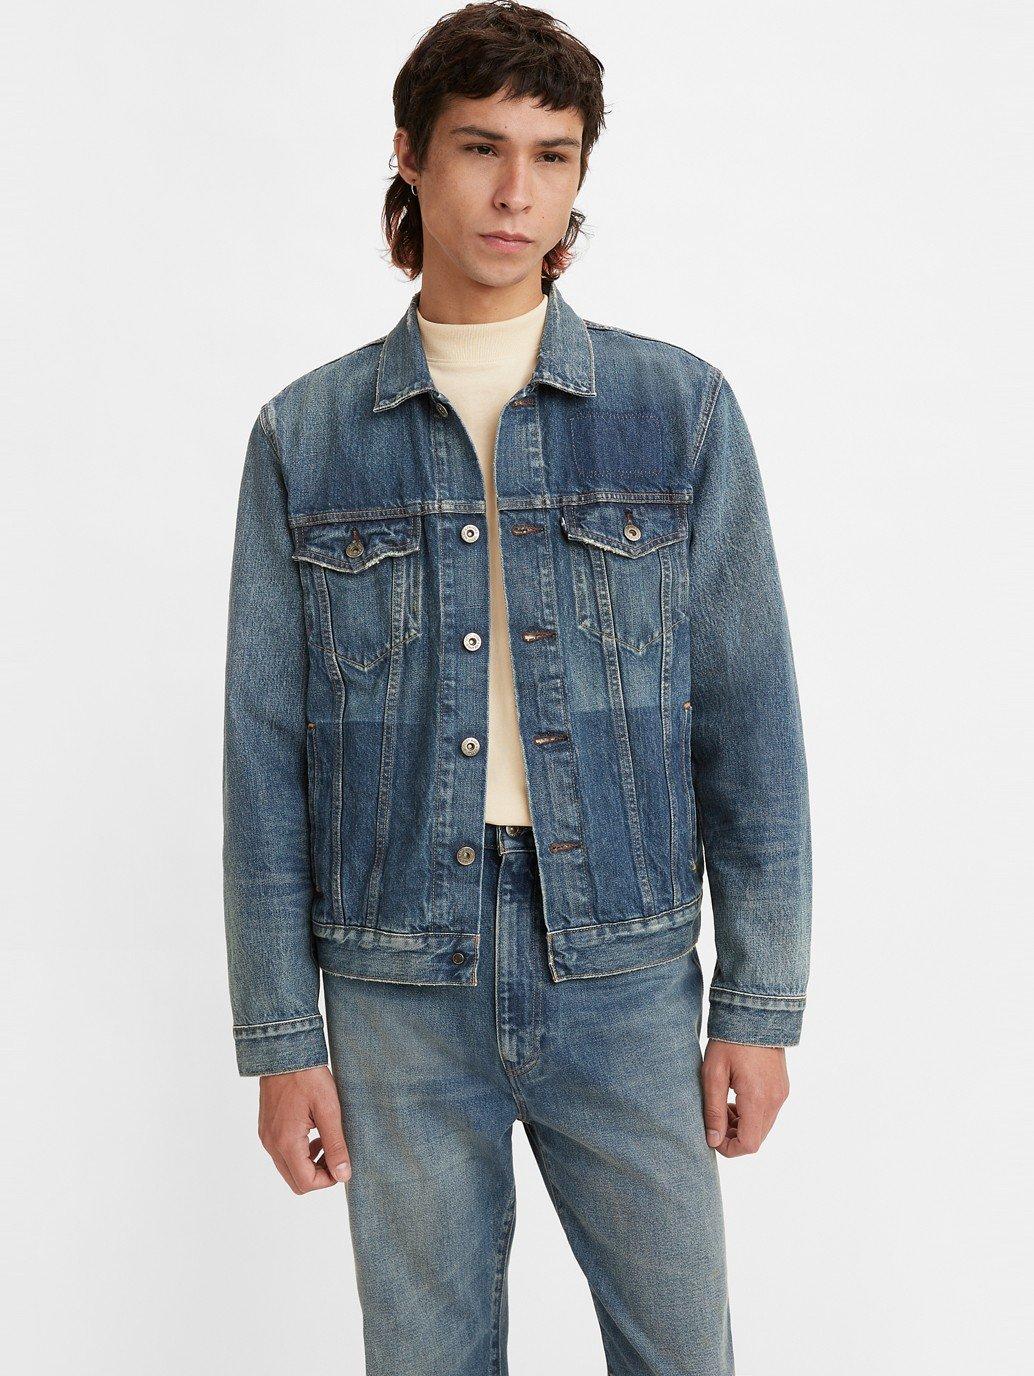 Buy Levi's® Made & Crafted® Men's Type III Trucker Jacket | Levi's®  Official Online Store PH